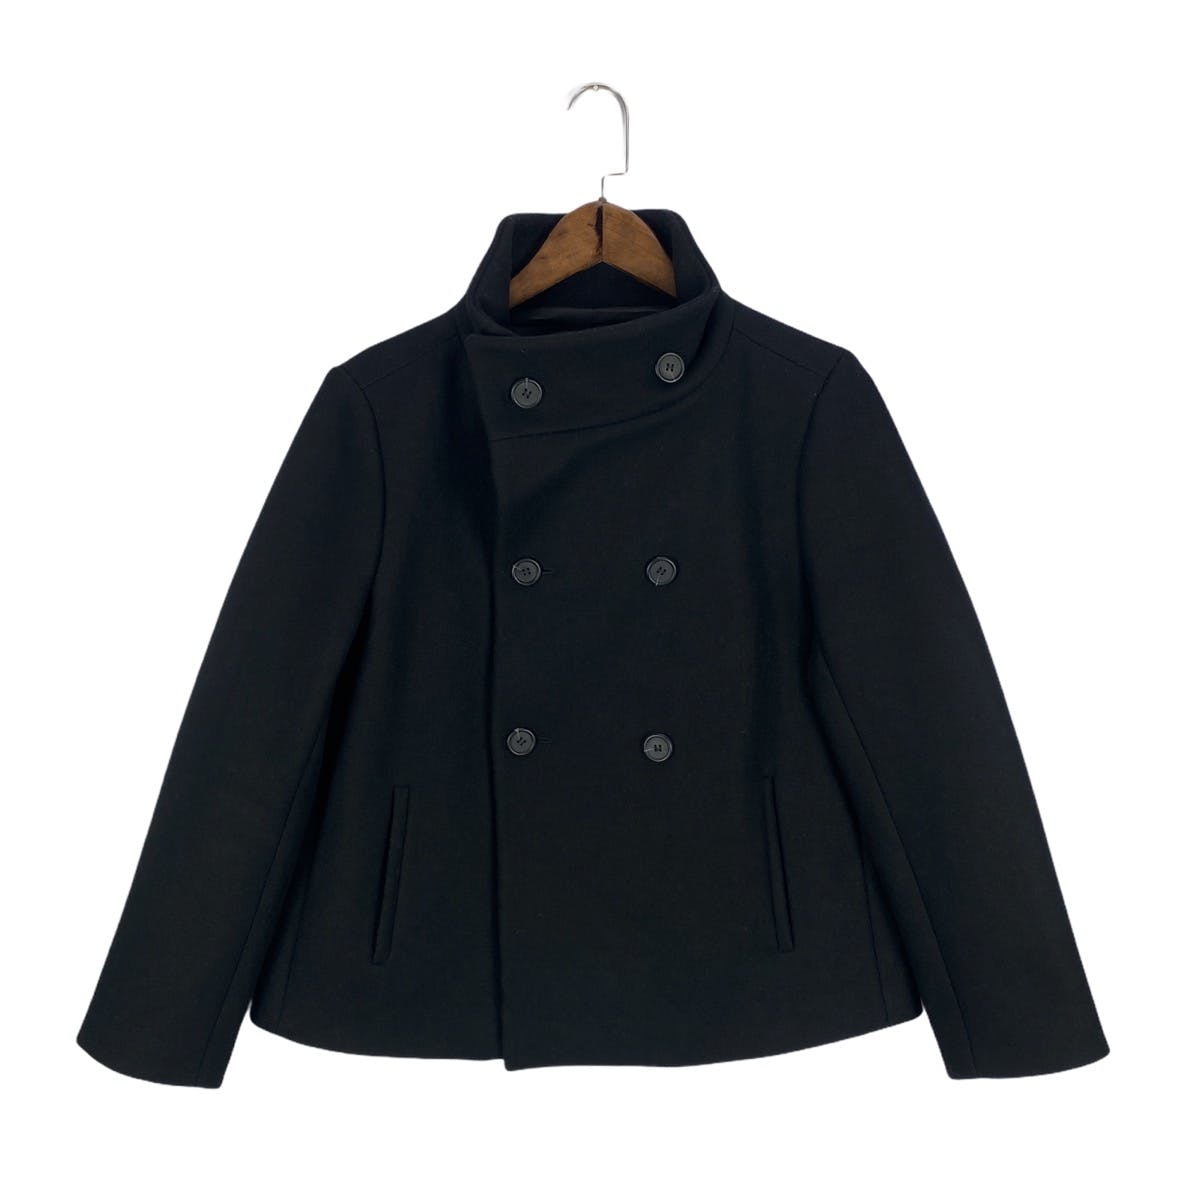 A.P.C Peacoat Wool Cropped Jacket Made In Poland - 6